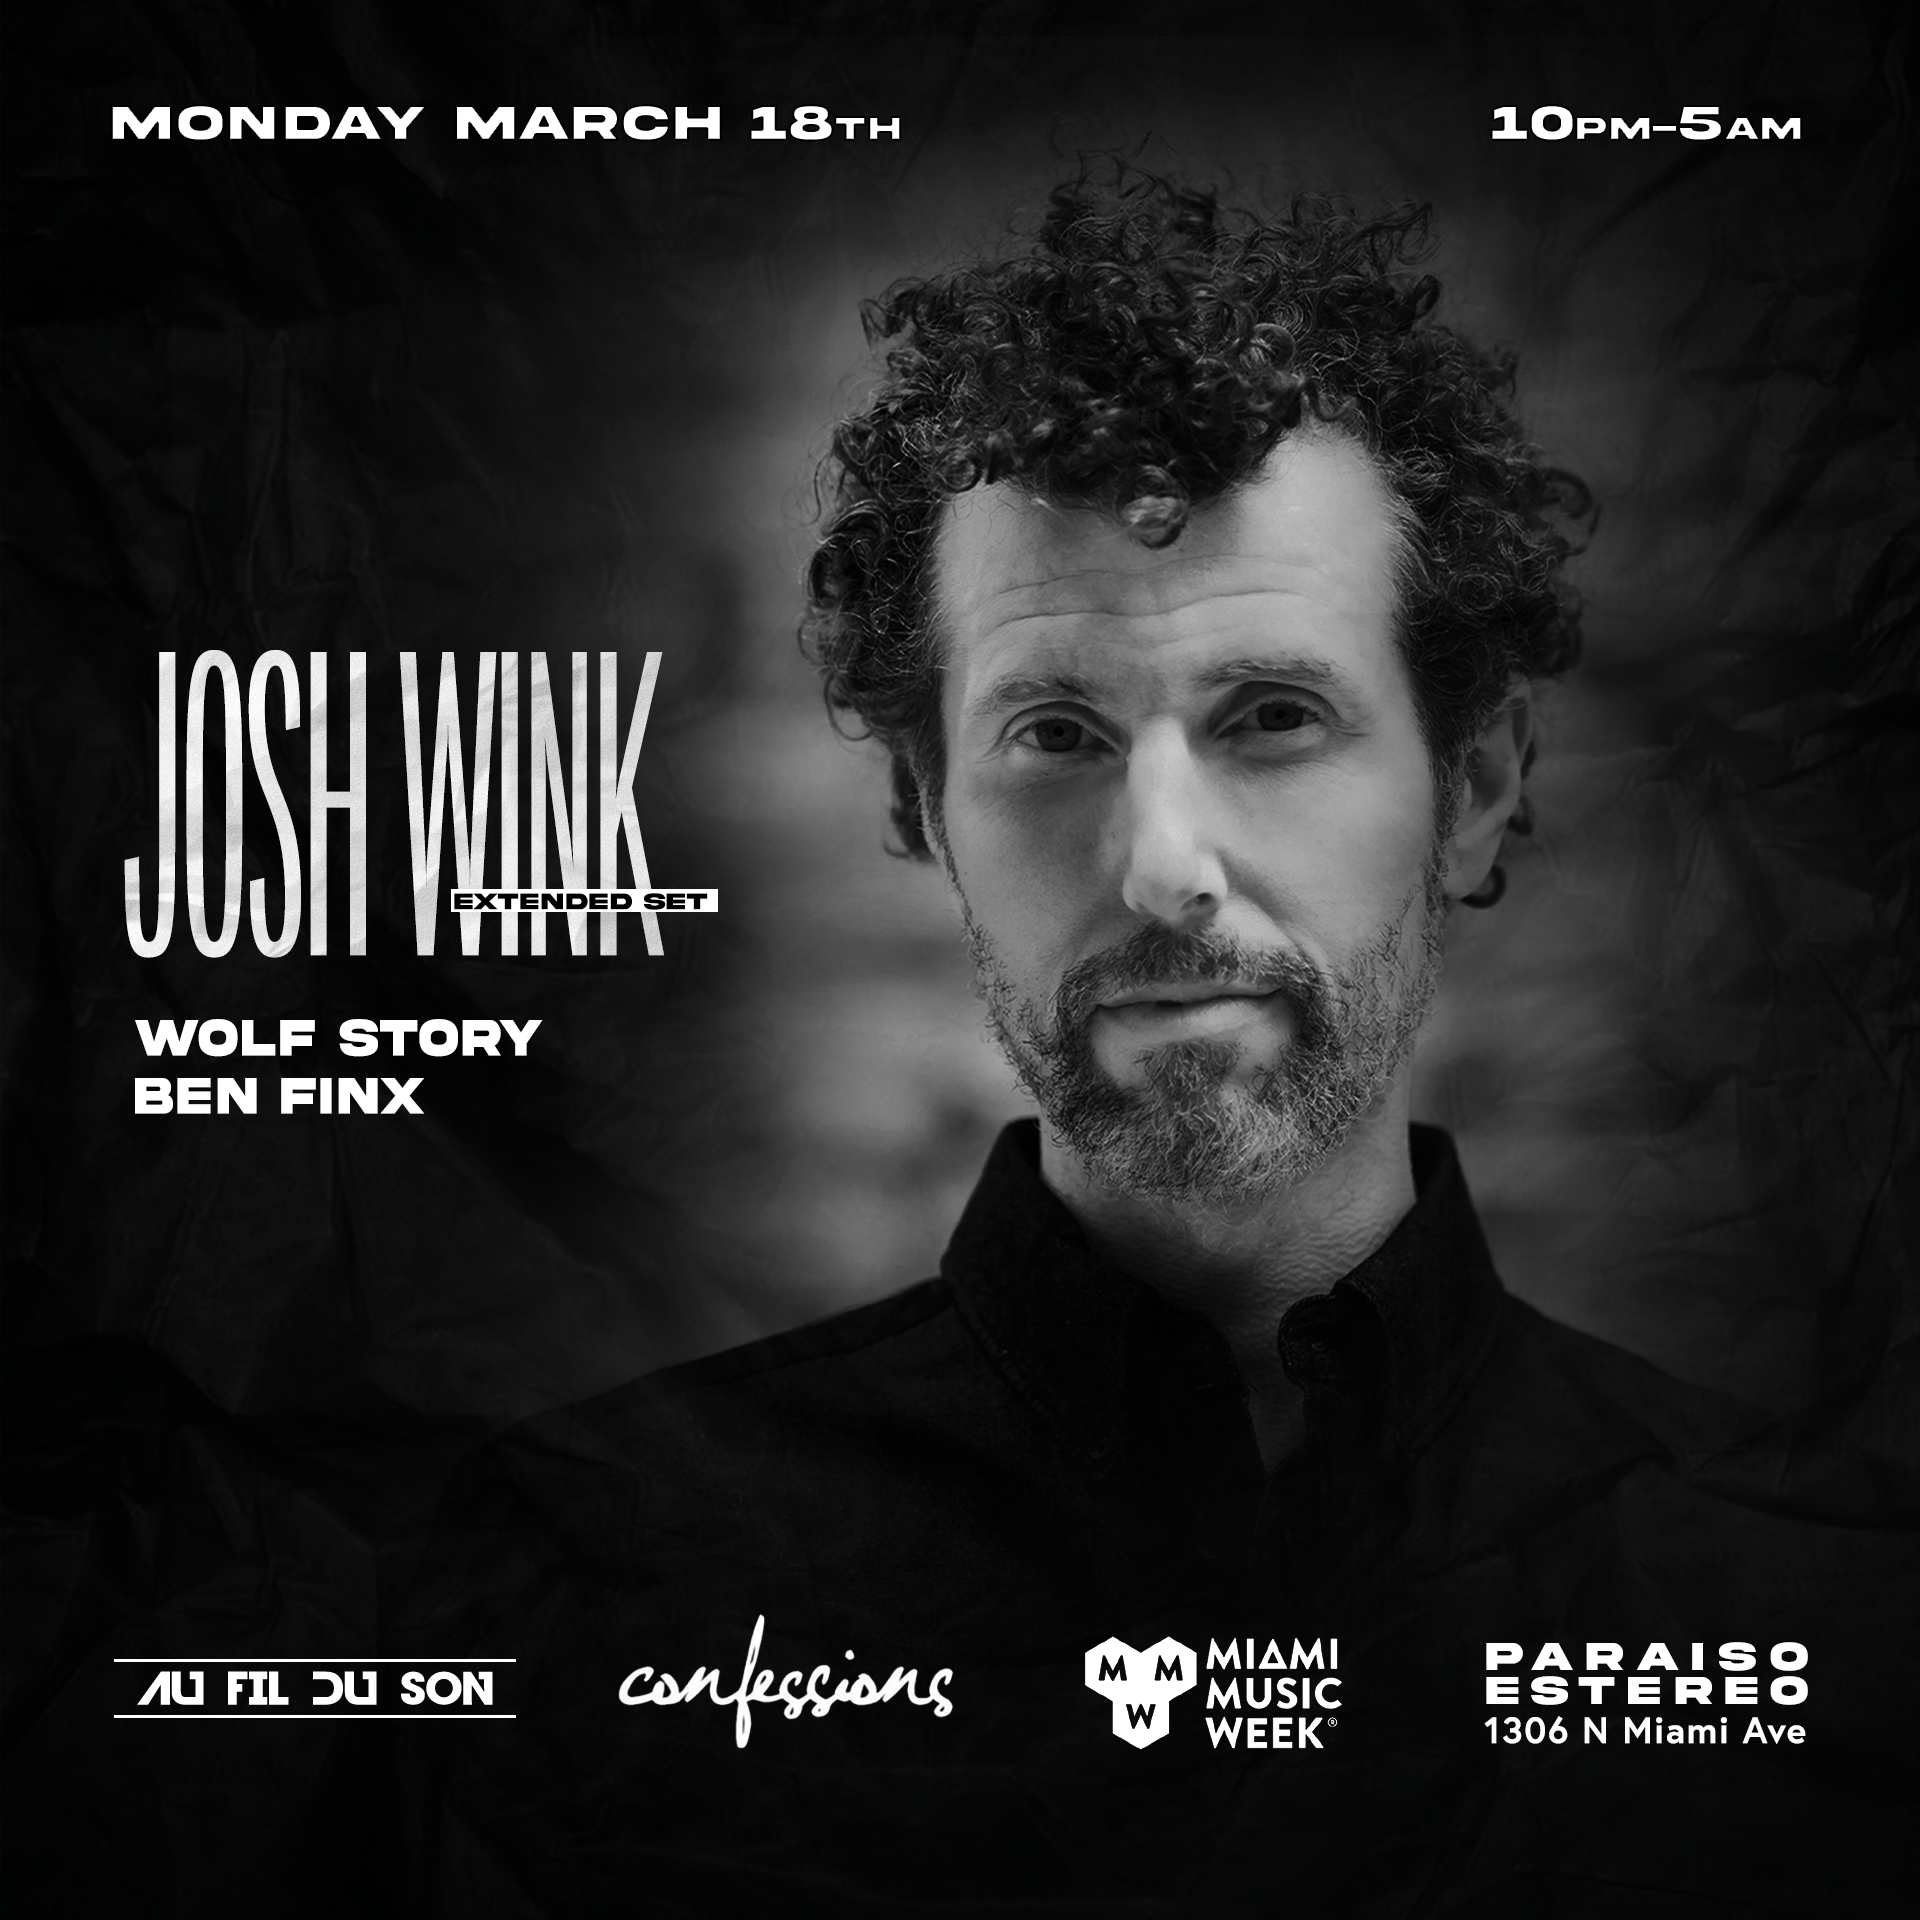 Josh Wink (Extended Set) at Paraiso Estereo - Miami Music Week - フライヤー裏